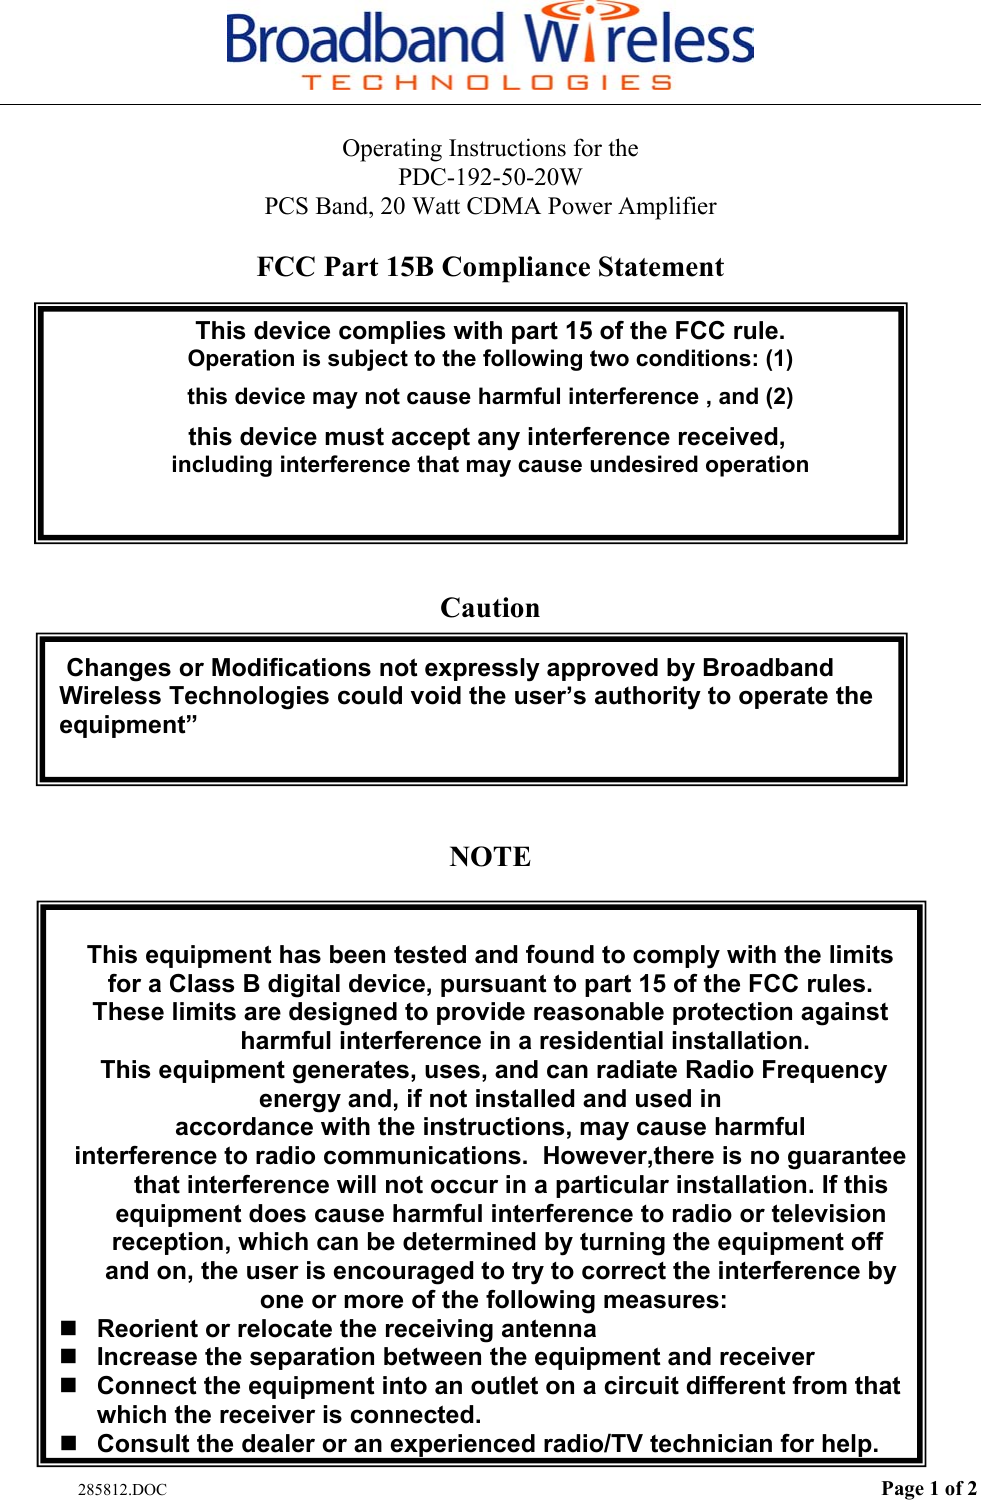   285812.DOC  Page 1 of 2 Operating Instructions for the  PDC-192-50-20W PCS Band, 20 Watt CDMA Power Amplifier  FCC Part 15B Compliance Statement  This device complies with part 15 of the FCC rule. Operation is subject to the following two conditions: (1) this device may not cause harmful interference , and (2) this device must accept any interference received,  including interference that may cause undesired operation    Caution   Changes or Modifications not expressly approved by Broadband       Wireless Technologies could void the user’s authority to operate the equipment”    NOTE   This equipment has been tested and found to comply with the limits for a Class B digital device, pursuant to part 15 of the FCC rules. These limits are designed to provide reasonable protection against           harmful interference in a residential installation.   This equipment generates, uses, and can radiate Radio Frequency    energy and, if not installed and used in accordance with the instructions, may cause harmful interference to radio communications.  However,there is no guarantee       that interference will not occur in a particular installation. If this    equipment does cause harmful interference to radio or television    reception, which can be determined by turning the equipment off     and on, the user is encouraged to try to correct the interference by  one or more of the following measures:  Reorient or relocate the receiving antenna  Increase the separation between the equipment and receiver  Connect the equipment into an outlet on a circuit different from that which the receiver is connected.  Consult the dealer or an experienced radio/TV technician for help. 